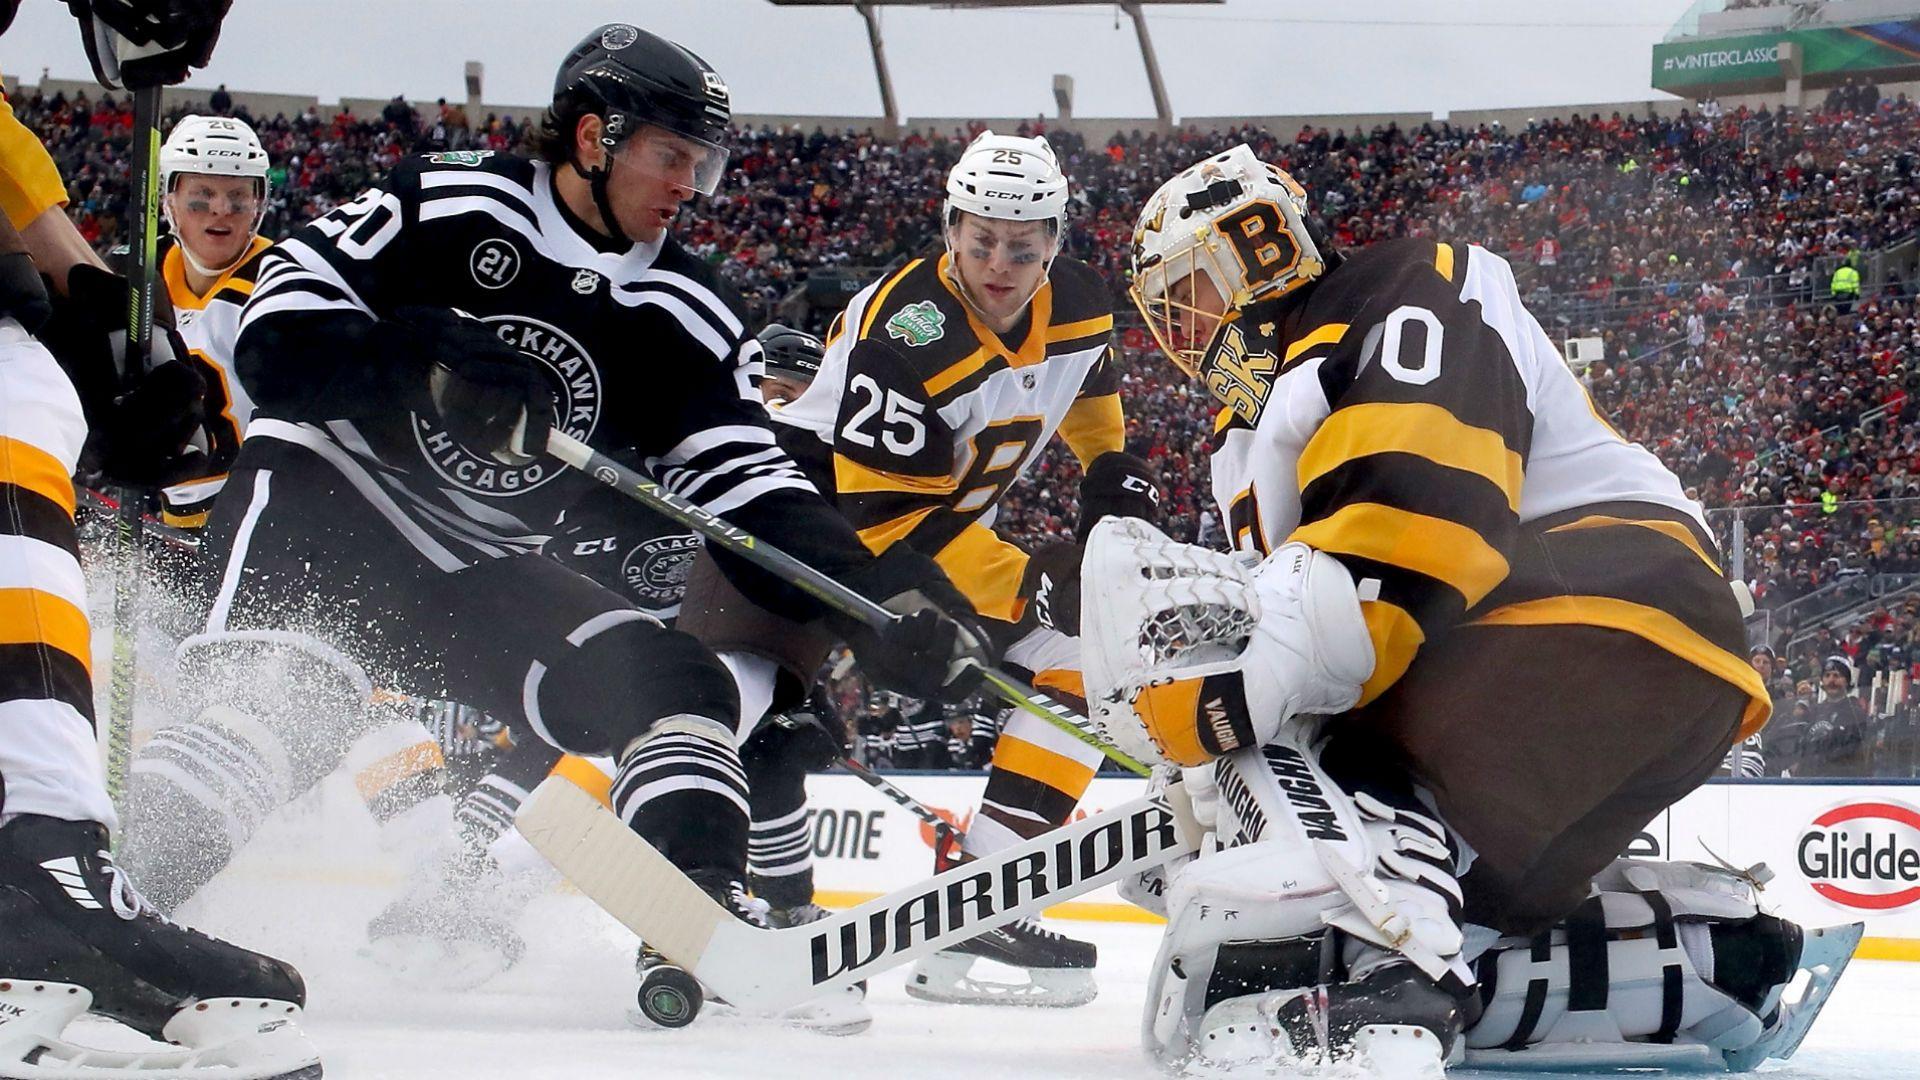 NHL Winter Classic 2019 results: Score, highlights from Bruins' win